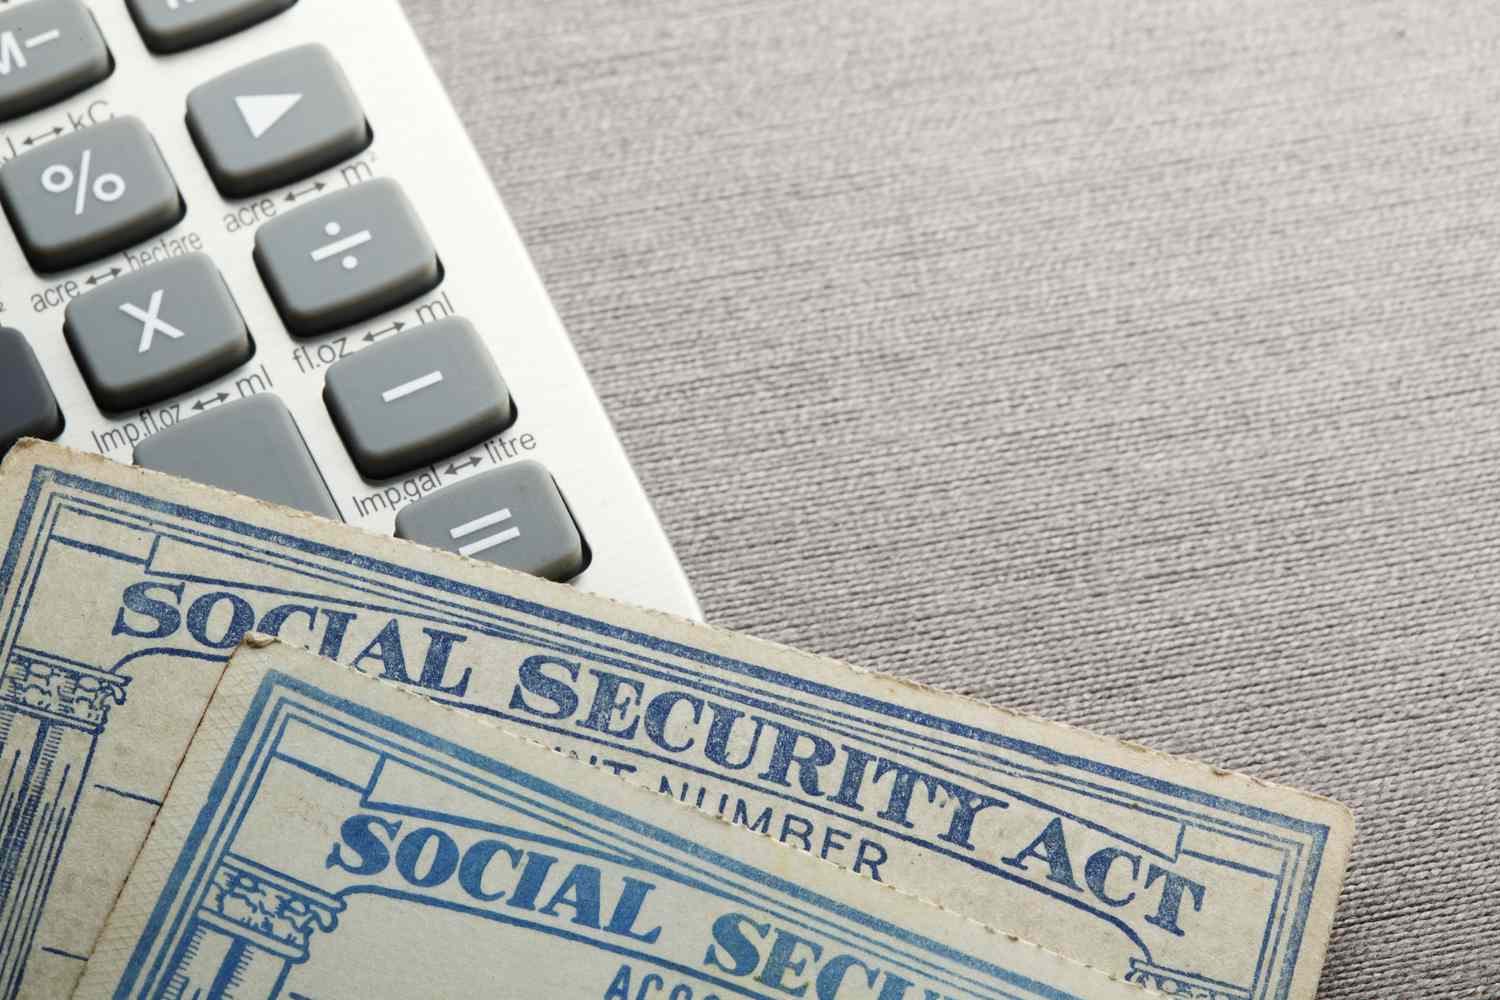 New Tax Laws Are Cutting Deep: Why Many Retirees Are Losing $3,000 in Social Security Benefits Annually